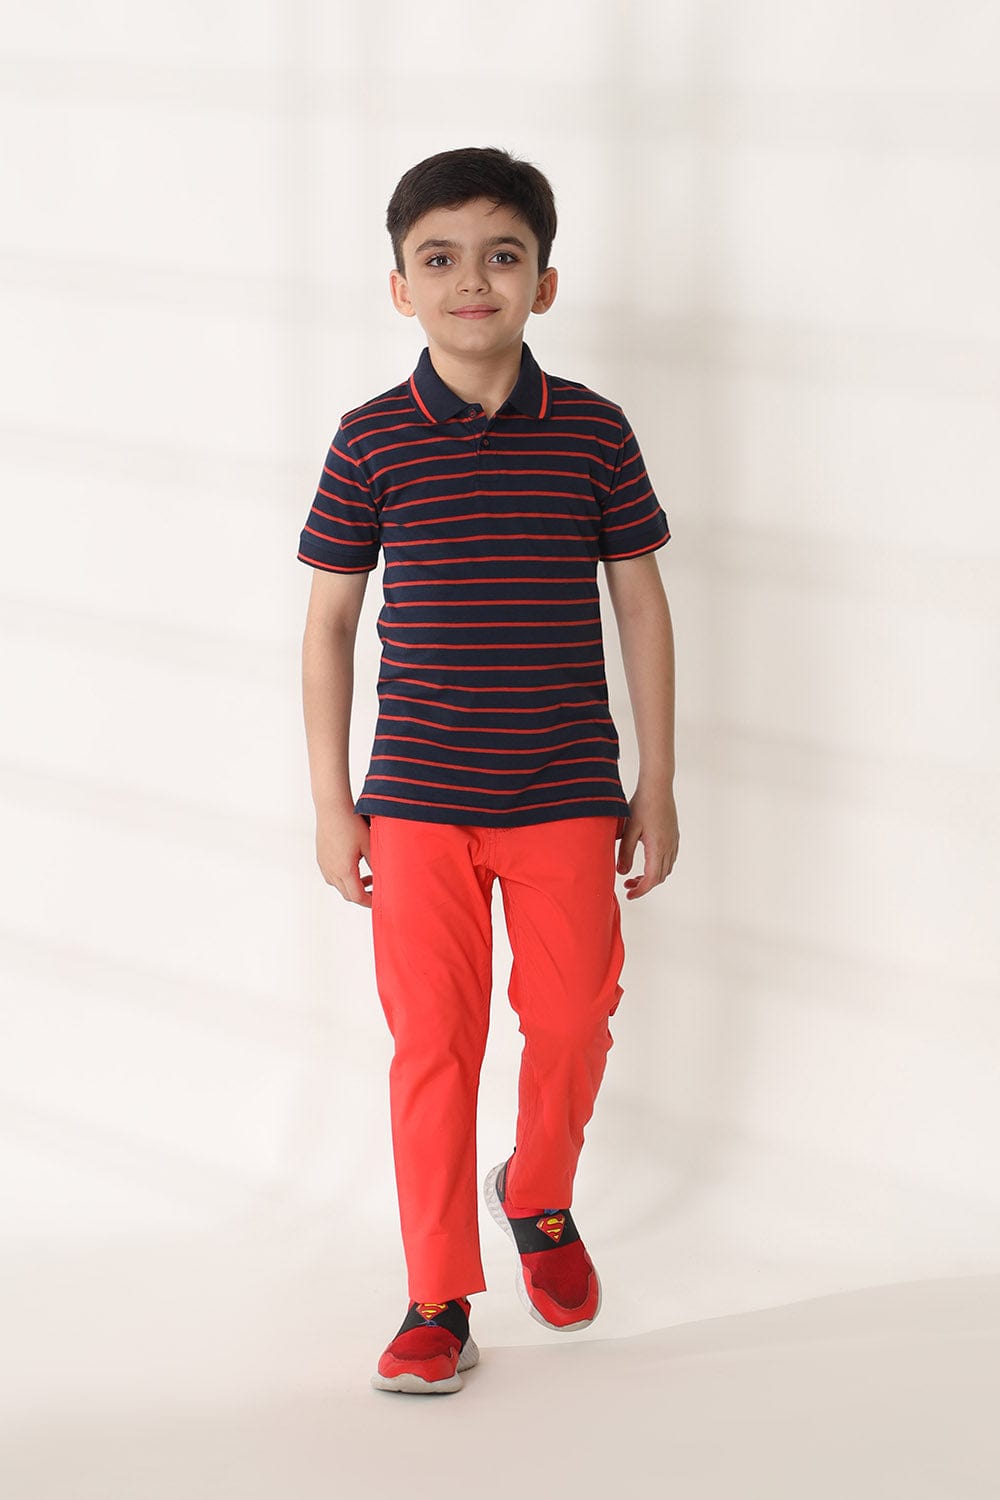 Hope Not Out by Shahid Afridi Boys Knit Polo Shirt Blue And Red Yarn Dyed Polo Shirt